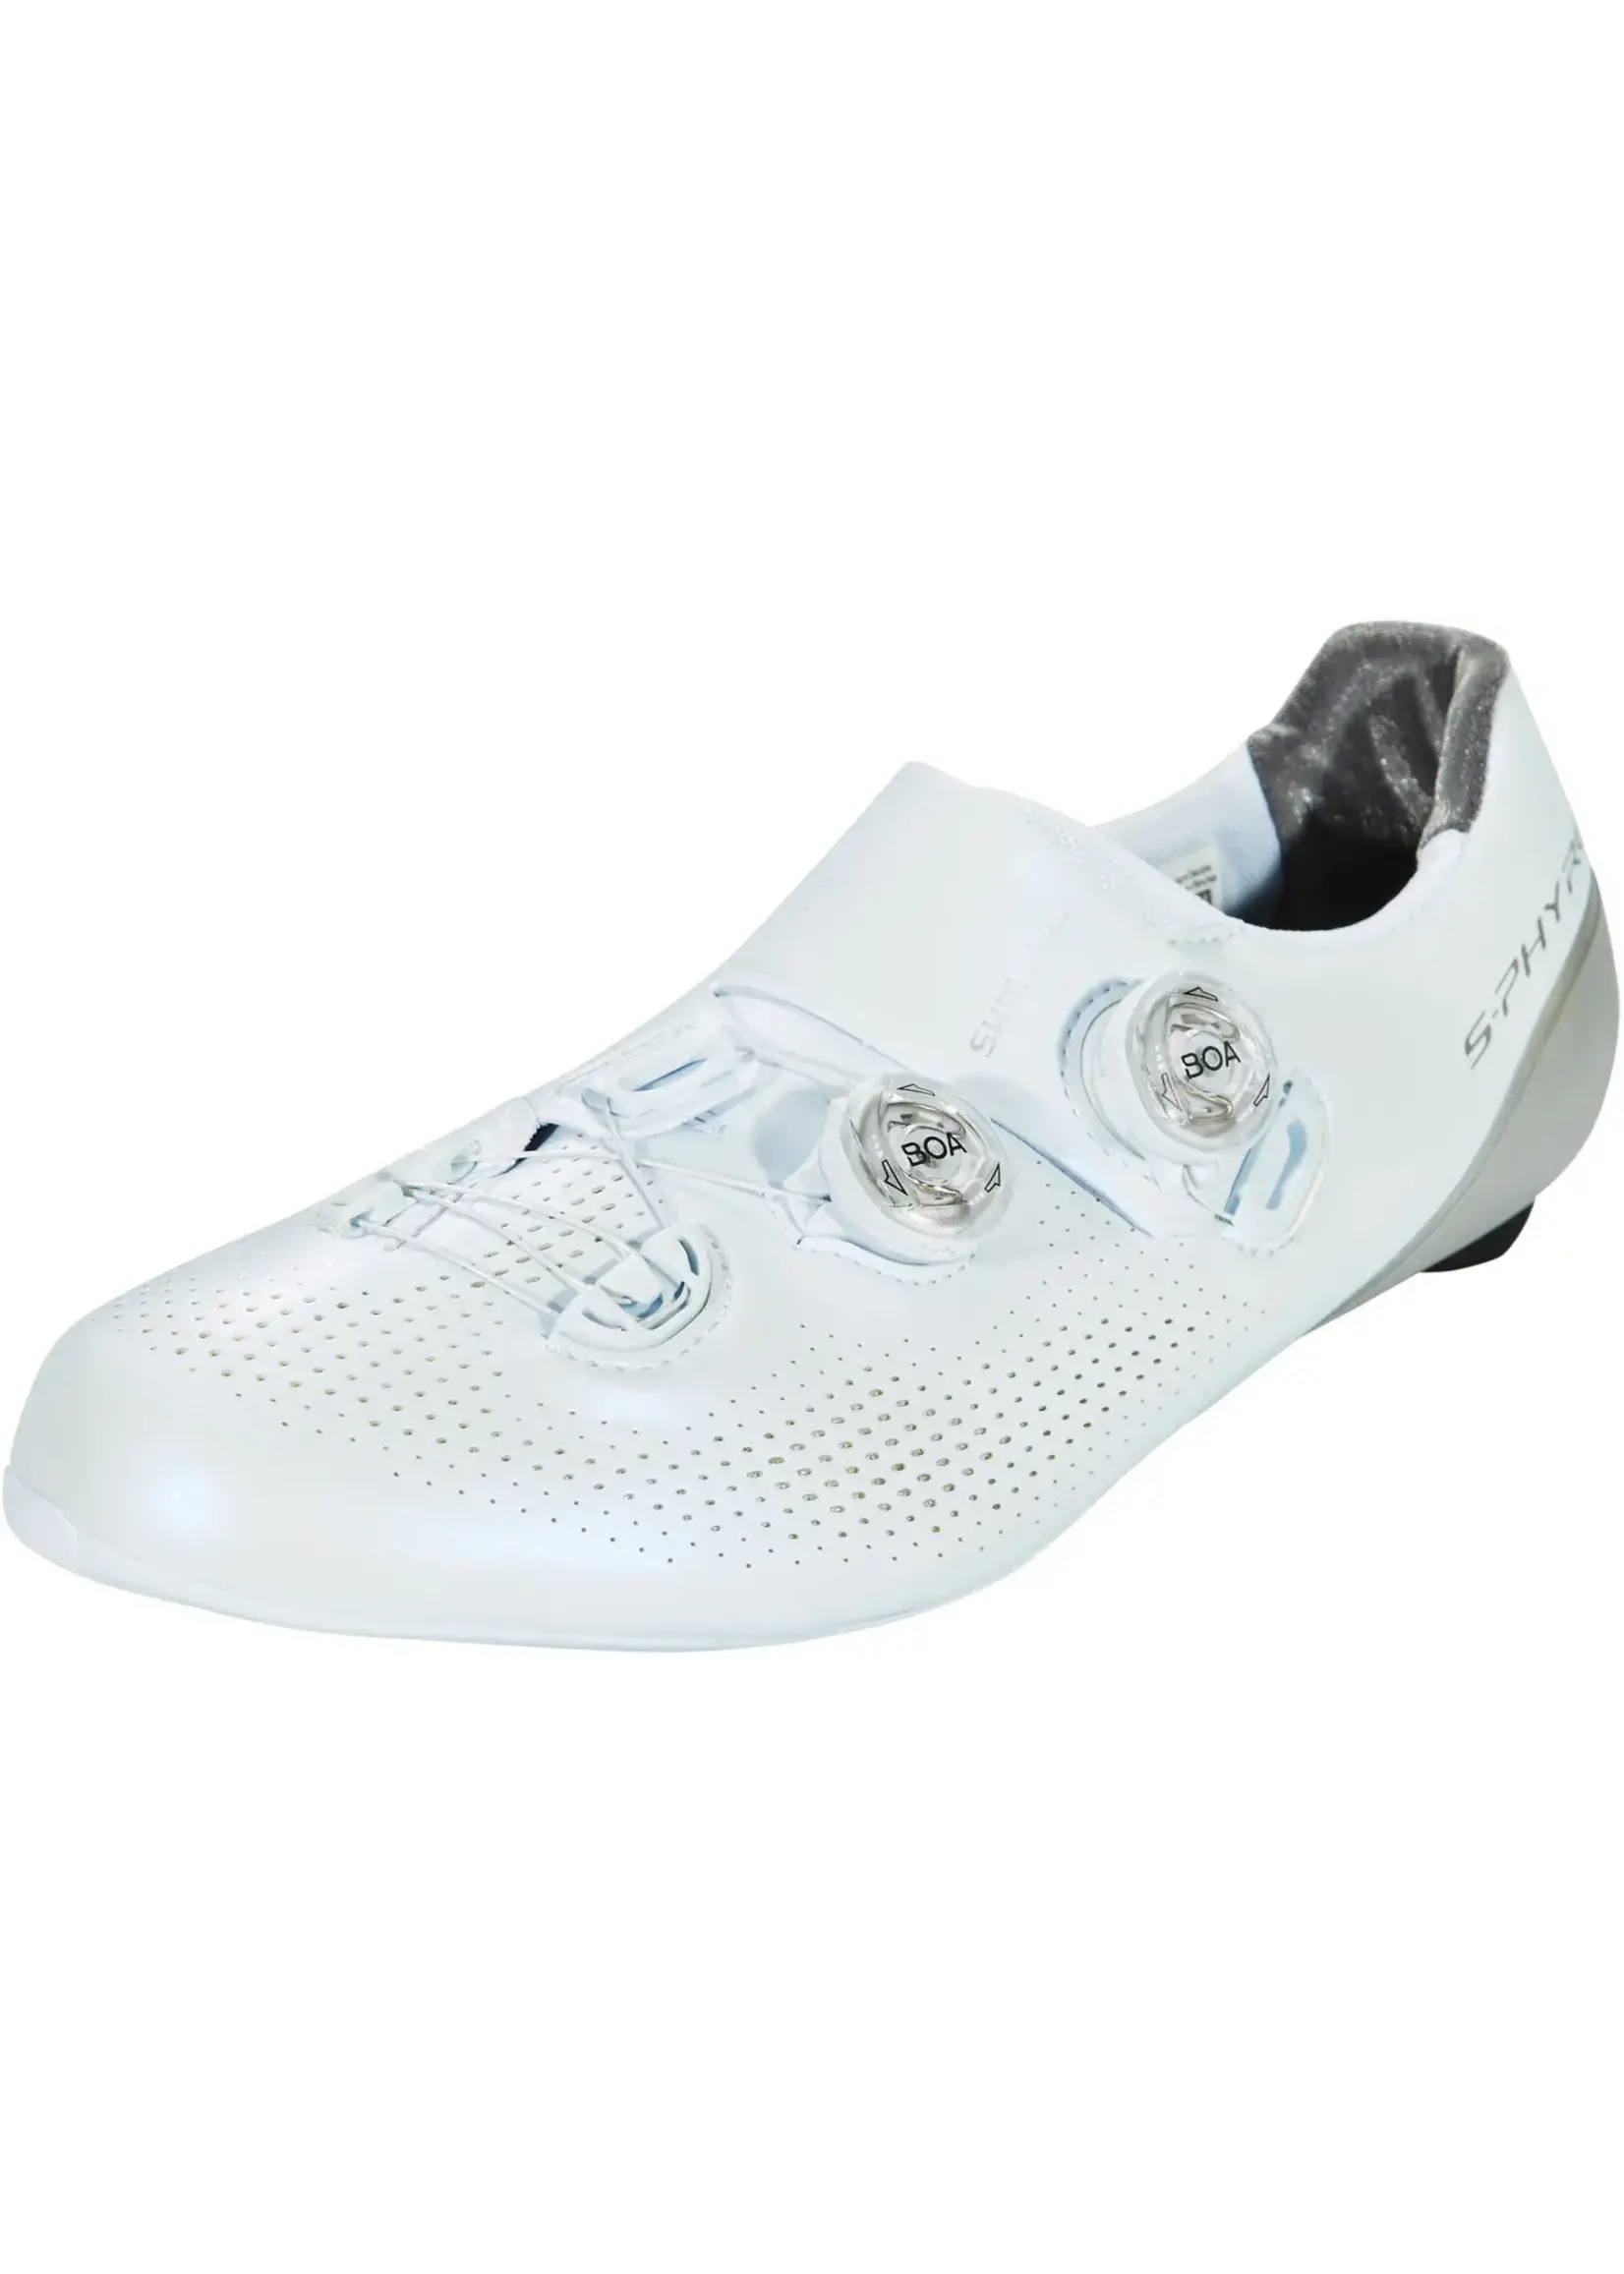 Shimano SH-RC901 S-PHYRE BICYCLE SHOES WHITE 39.0